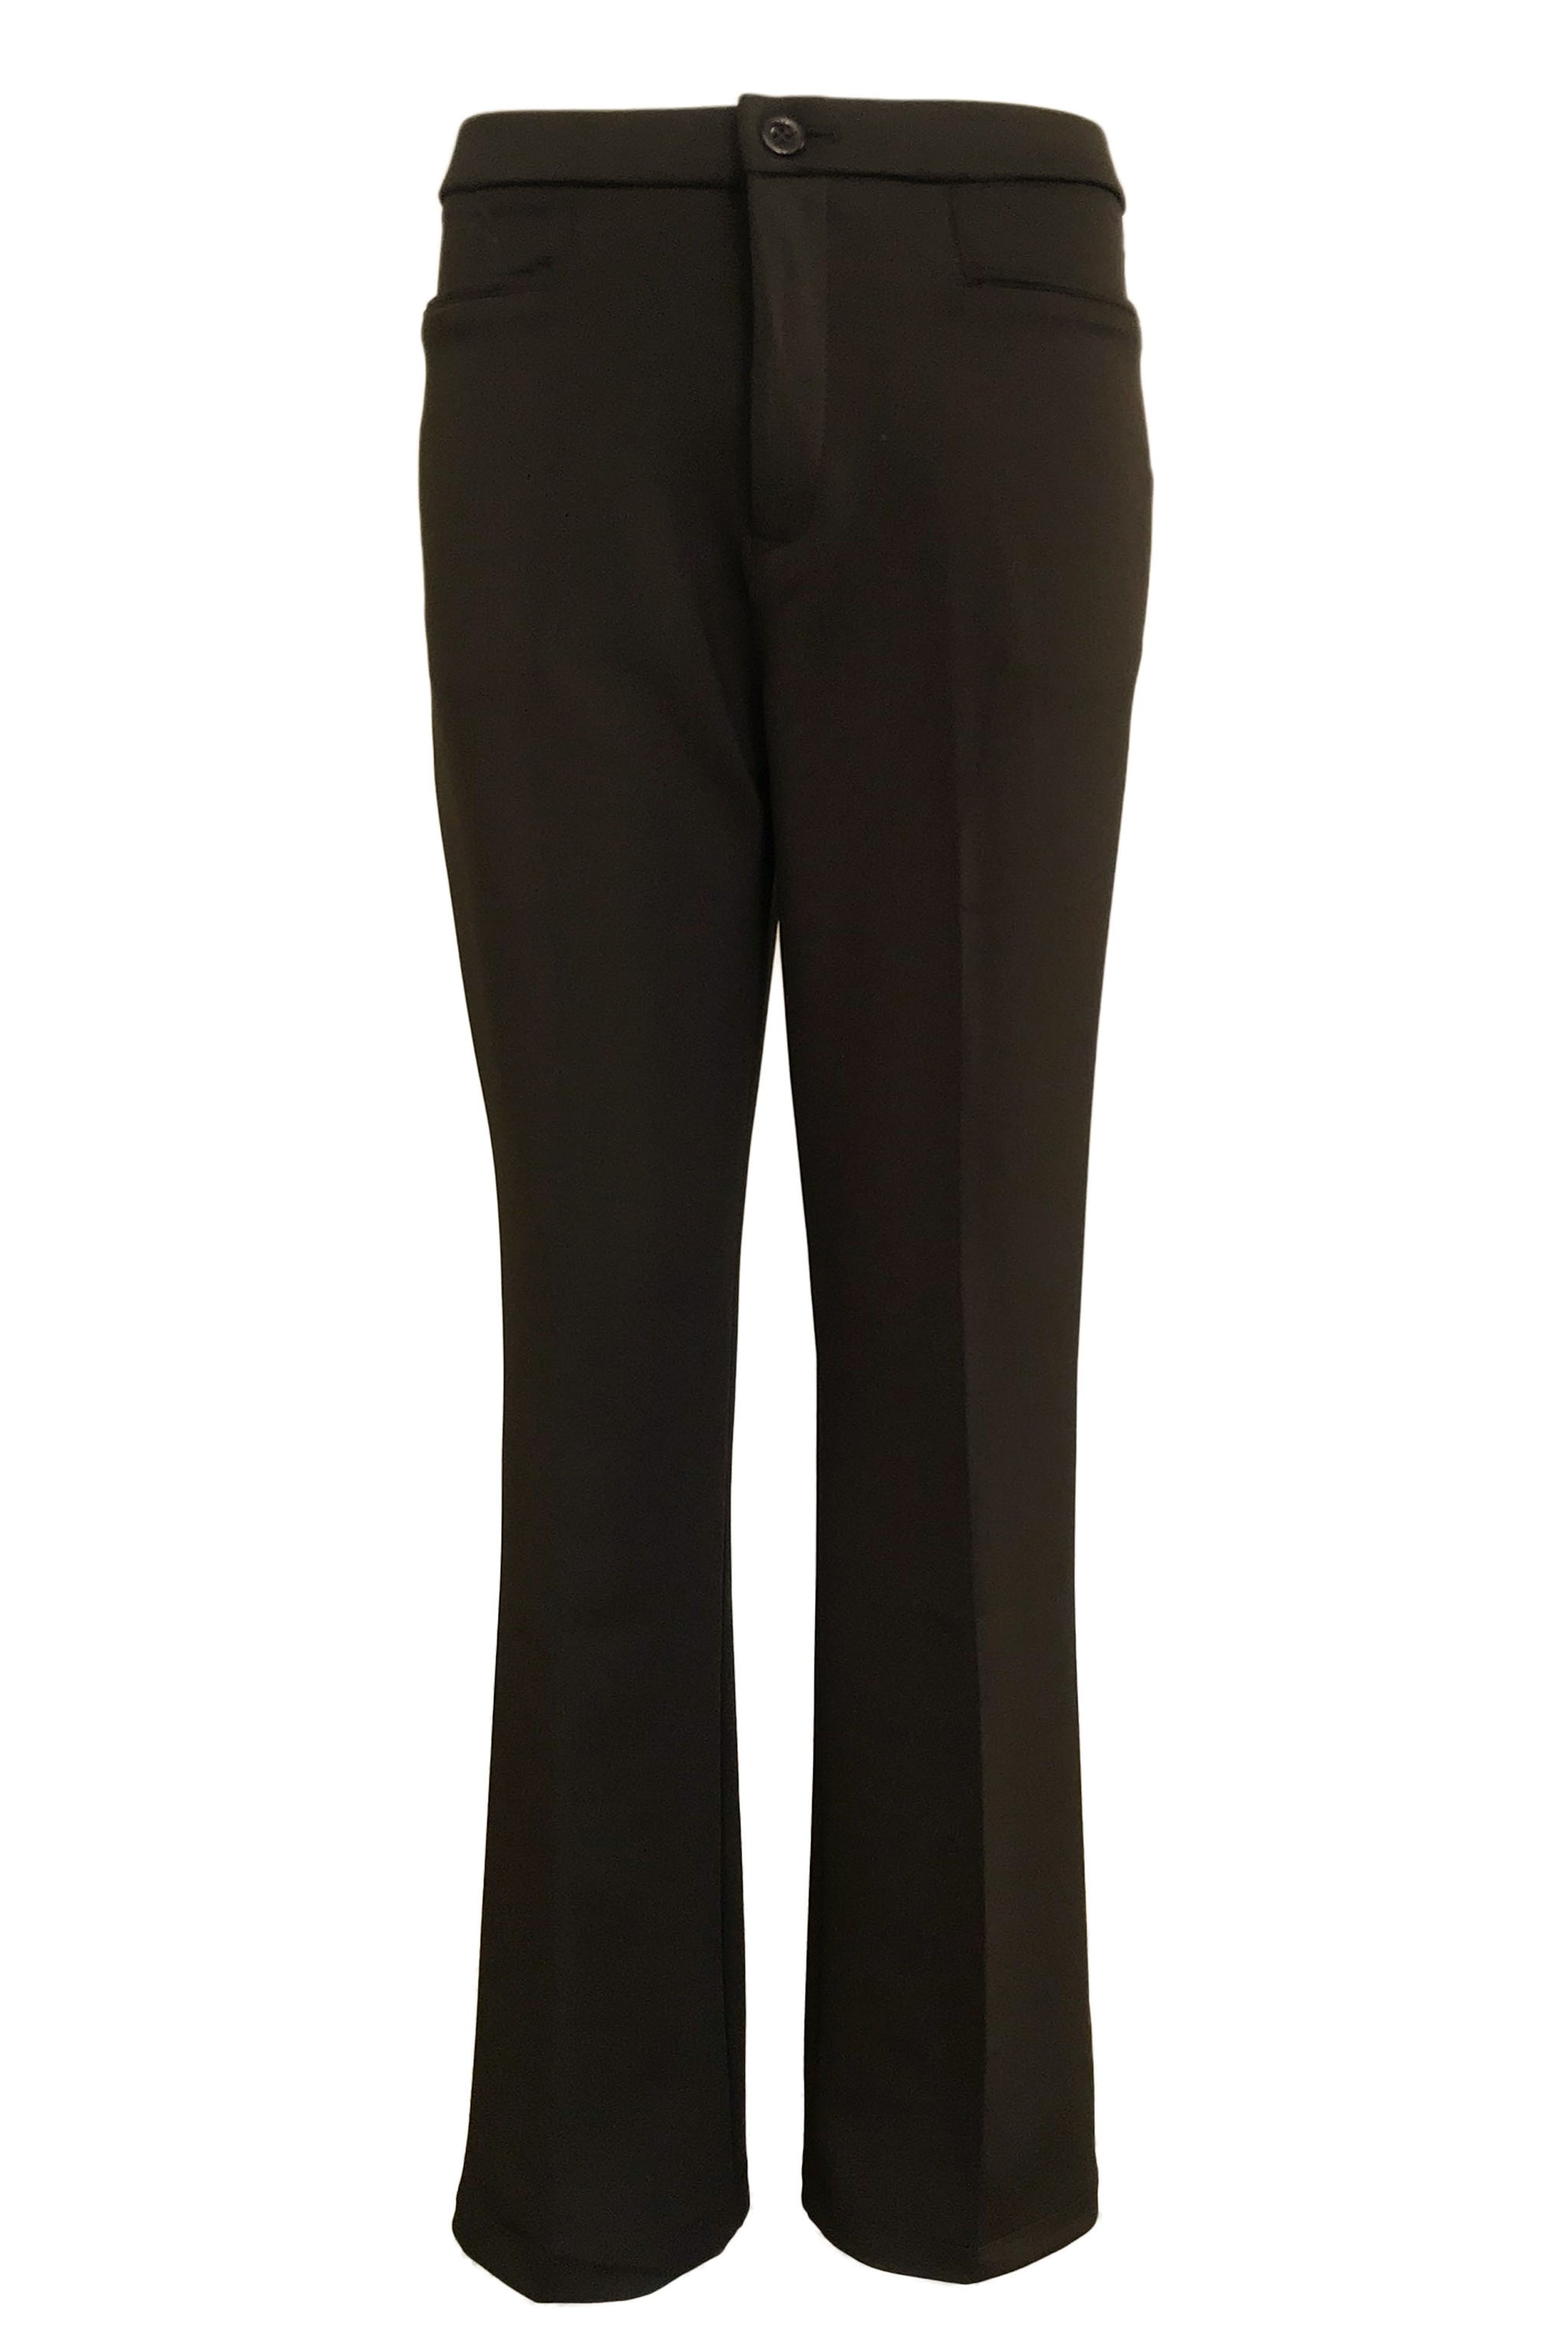 Stretchable Boot Cut Office Pants - Brown